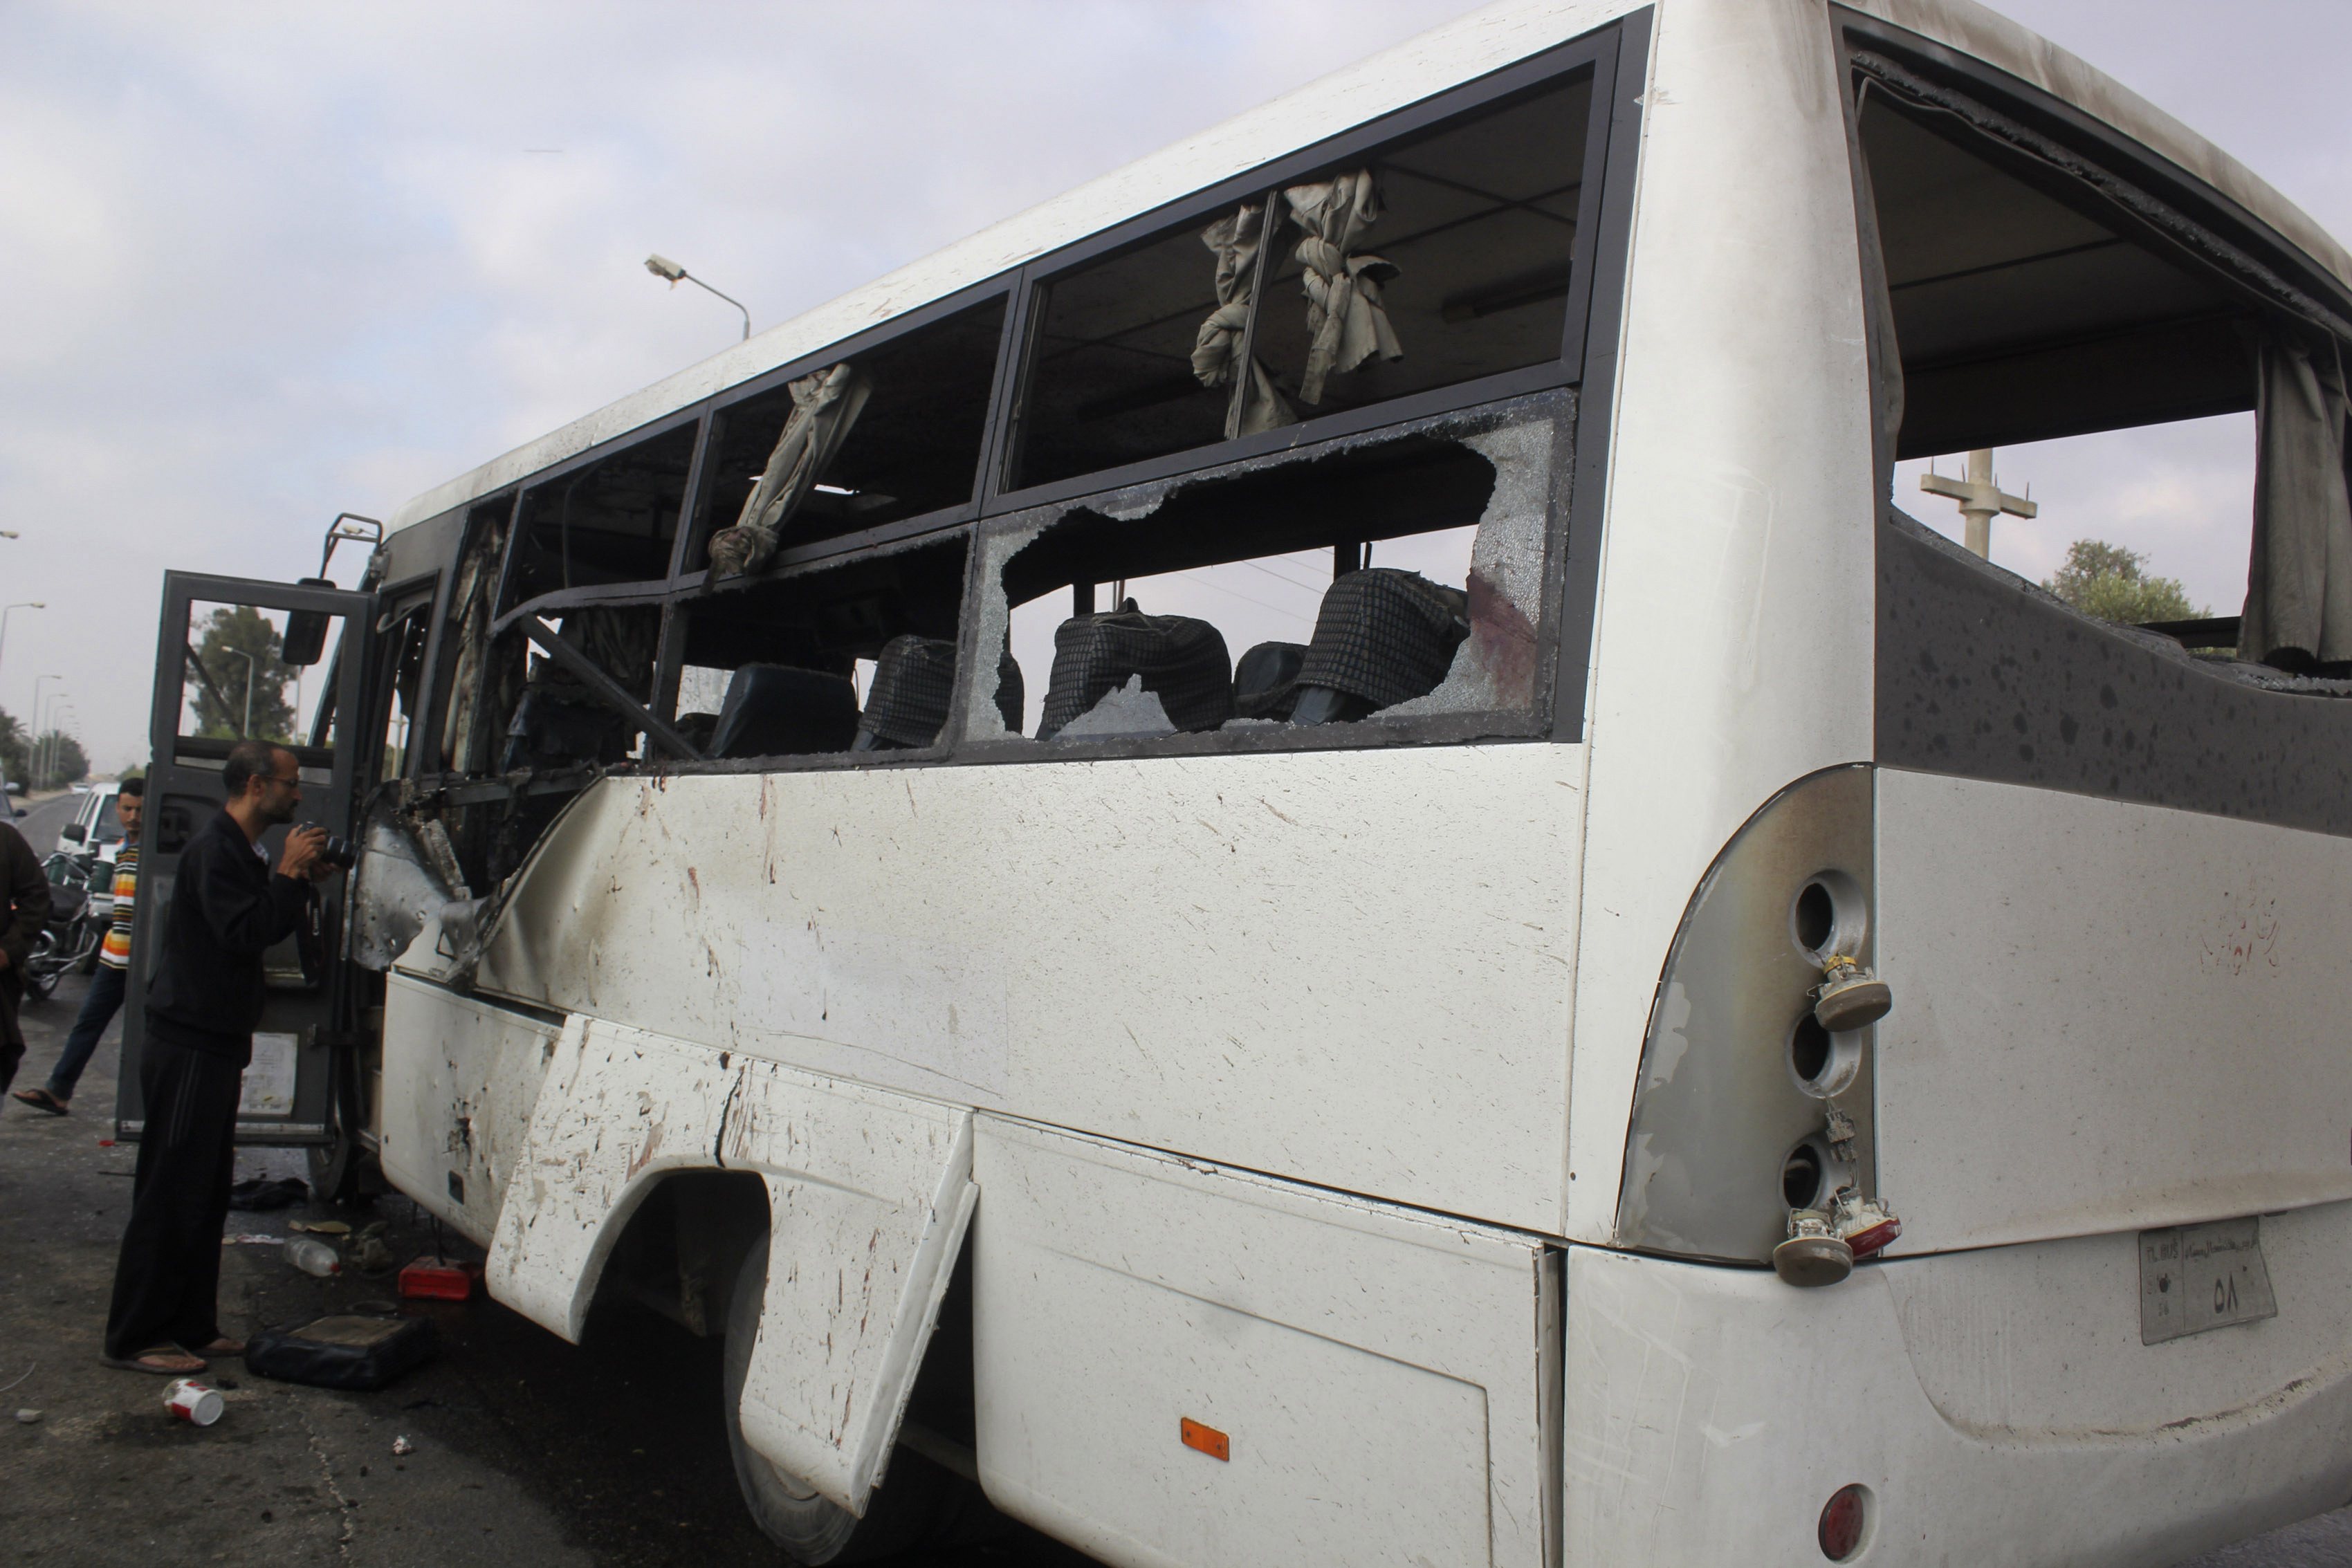 Terrorist groups targeted workers' bus due to military crack down - source